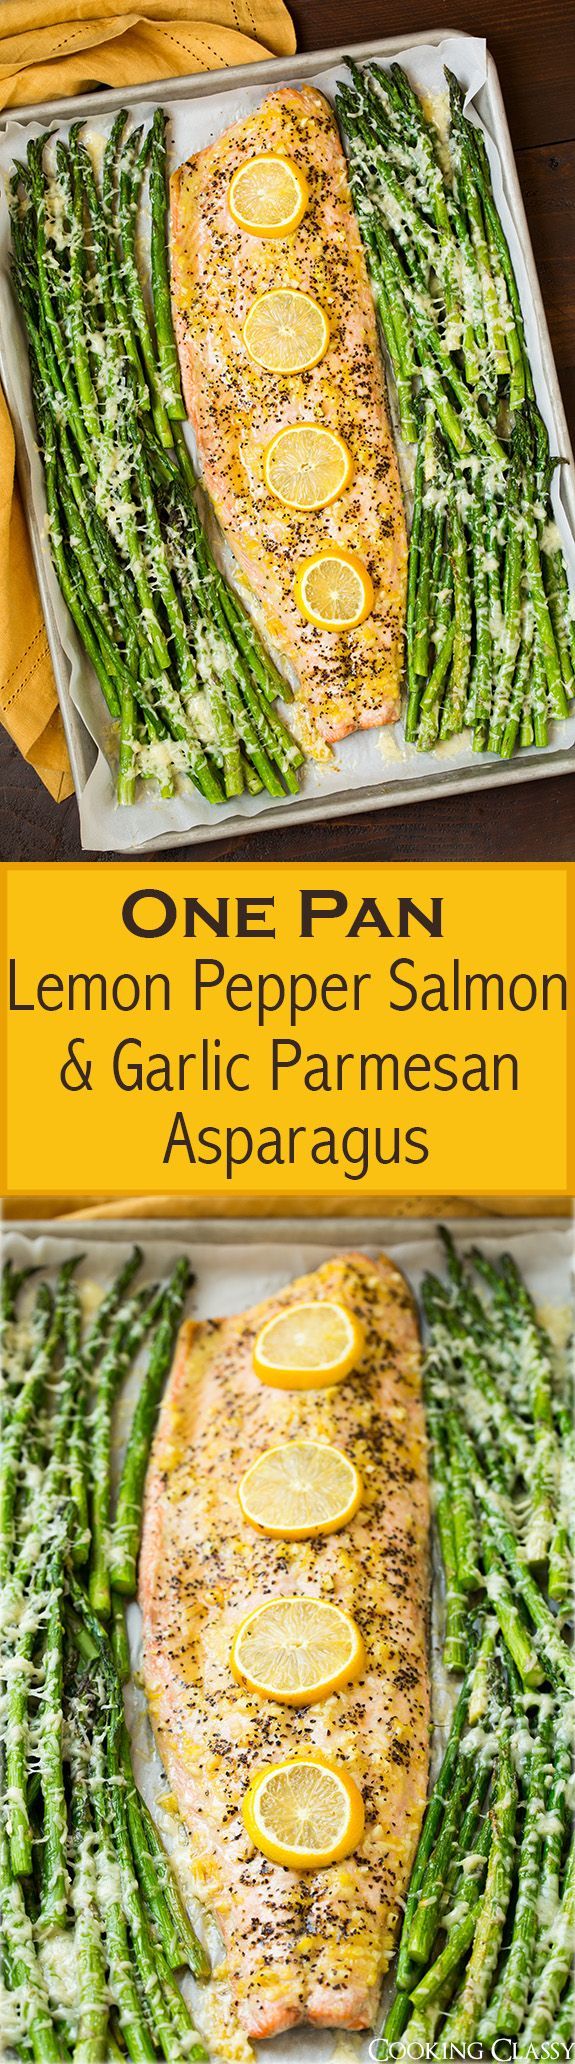 One Pan Roasted Lemon Pepper Salmon and Garlic Parmesan Asparagus – This is so easy to make and the flavor combo of the two is